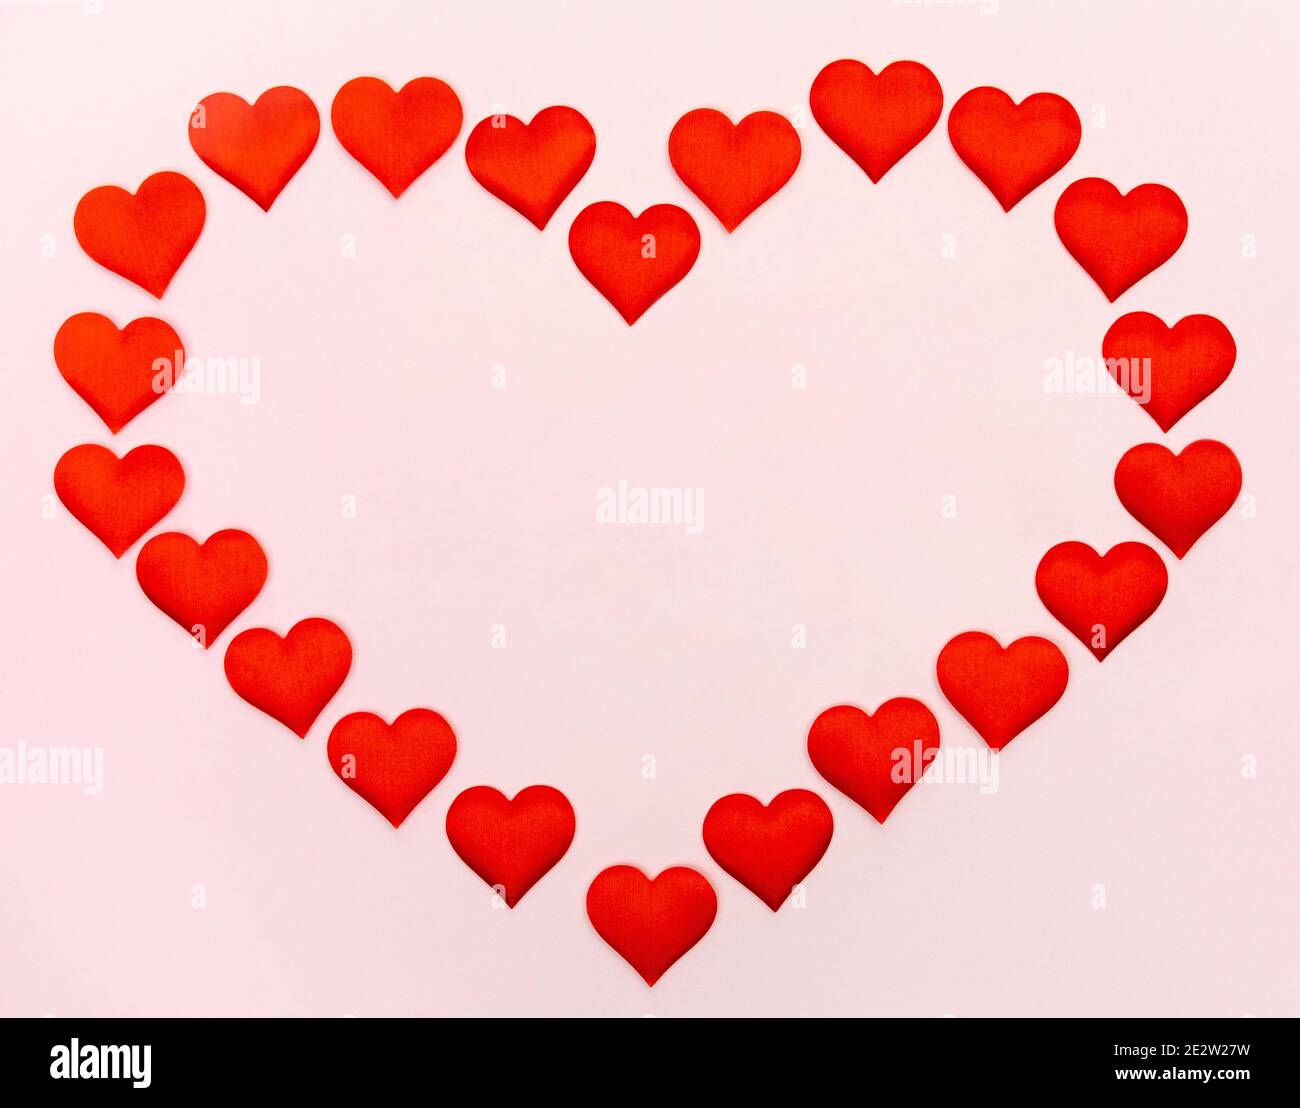 Big heart of small hearts with mock-up on a pink background. Concept of holidays and Valentines Day. Stock Photo